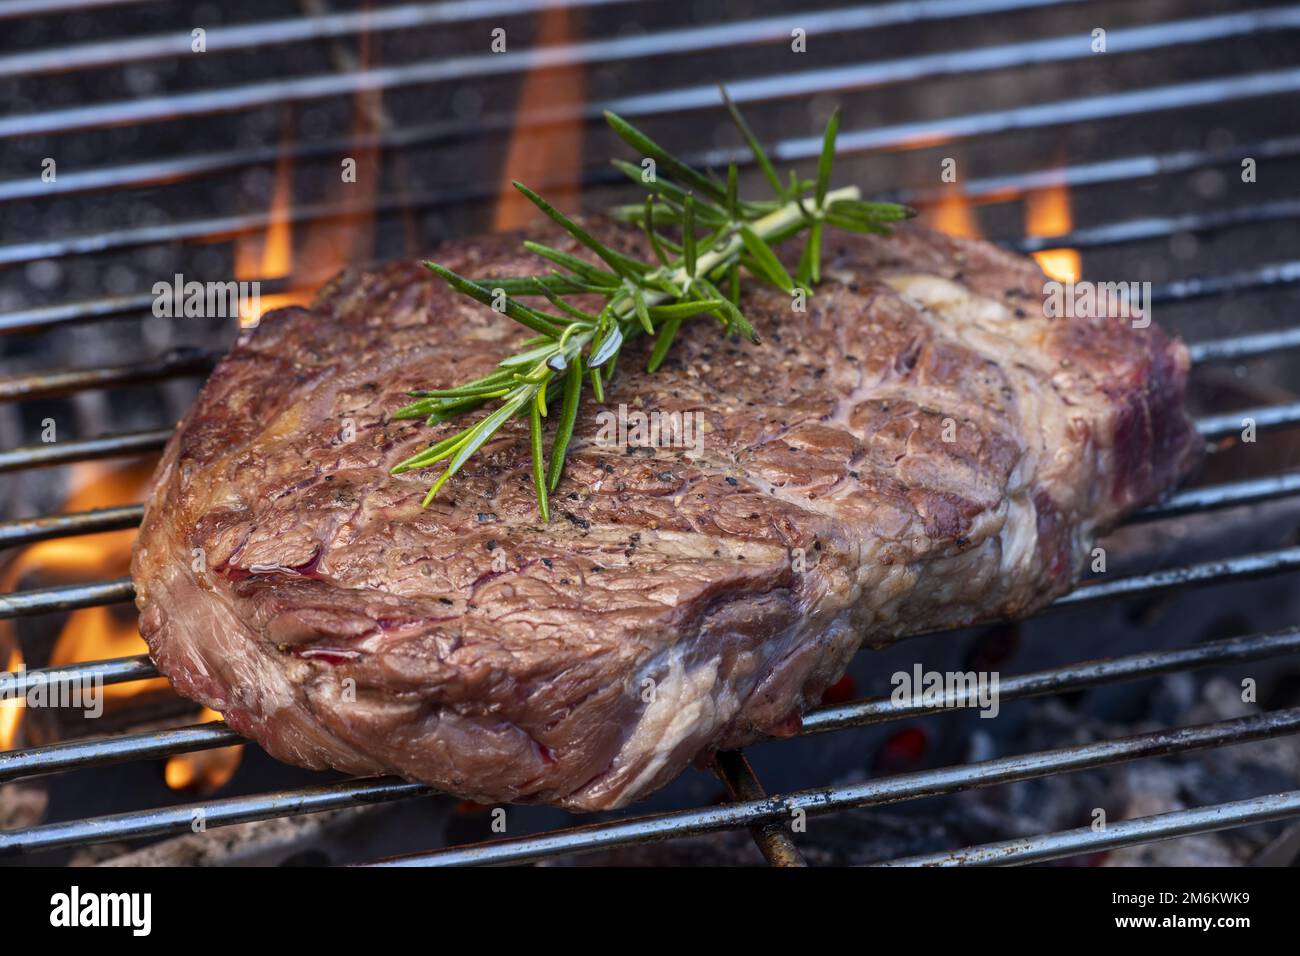 Raw steak with rosemary on the grill Stock Photo